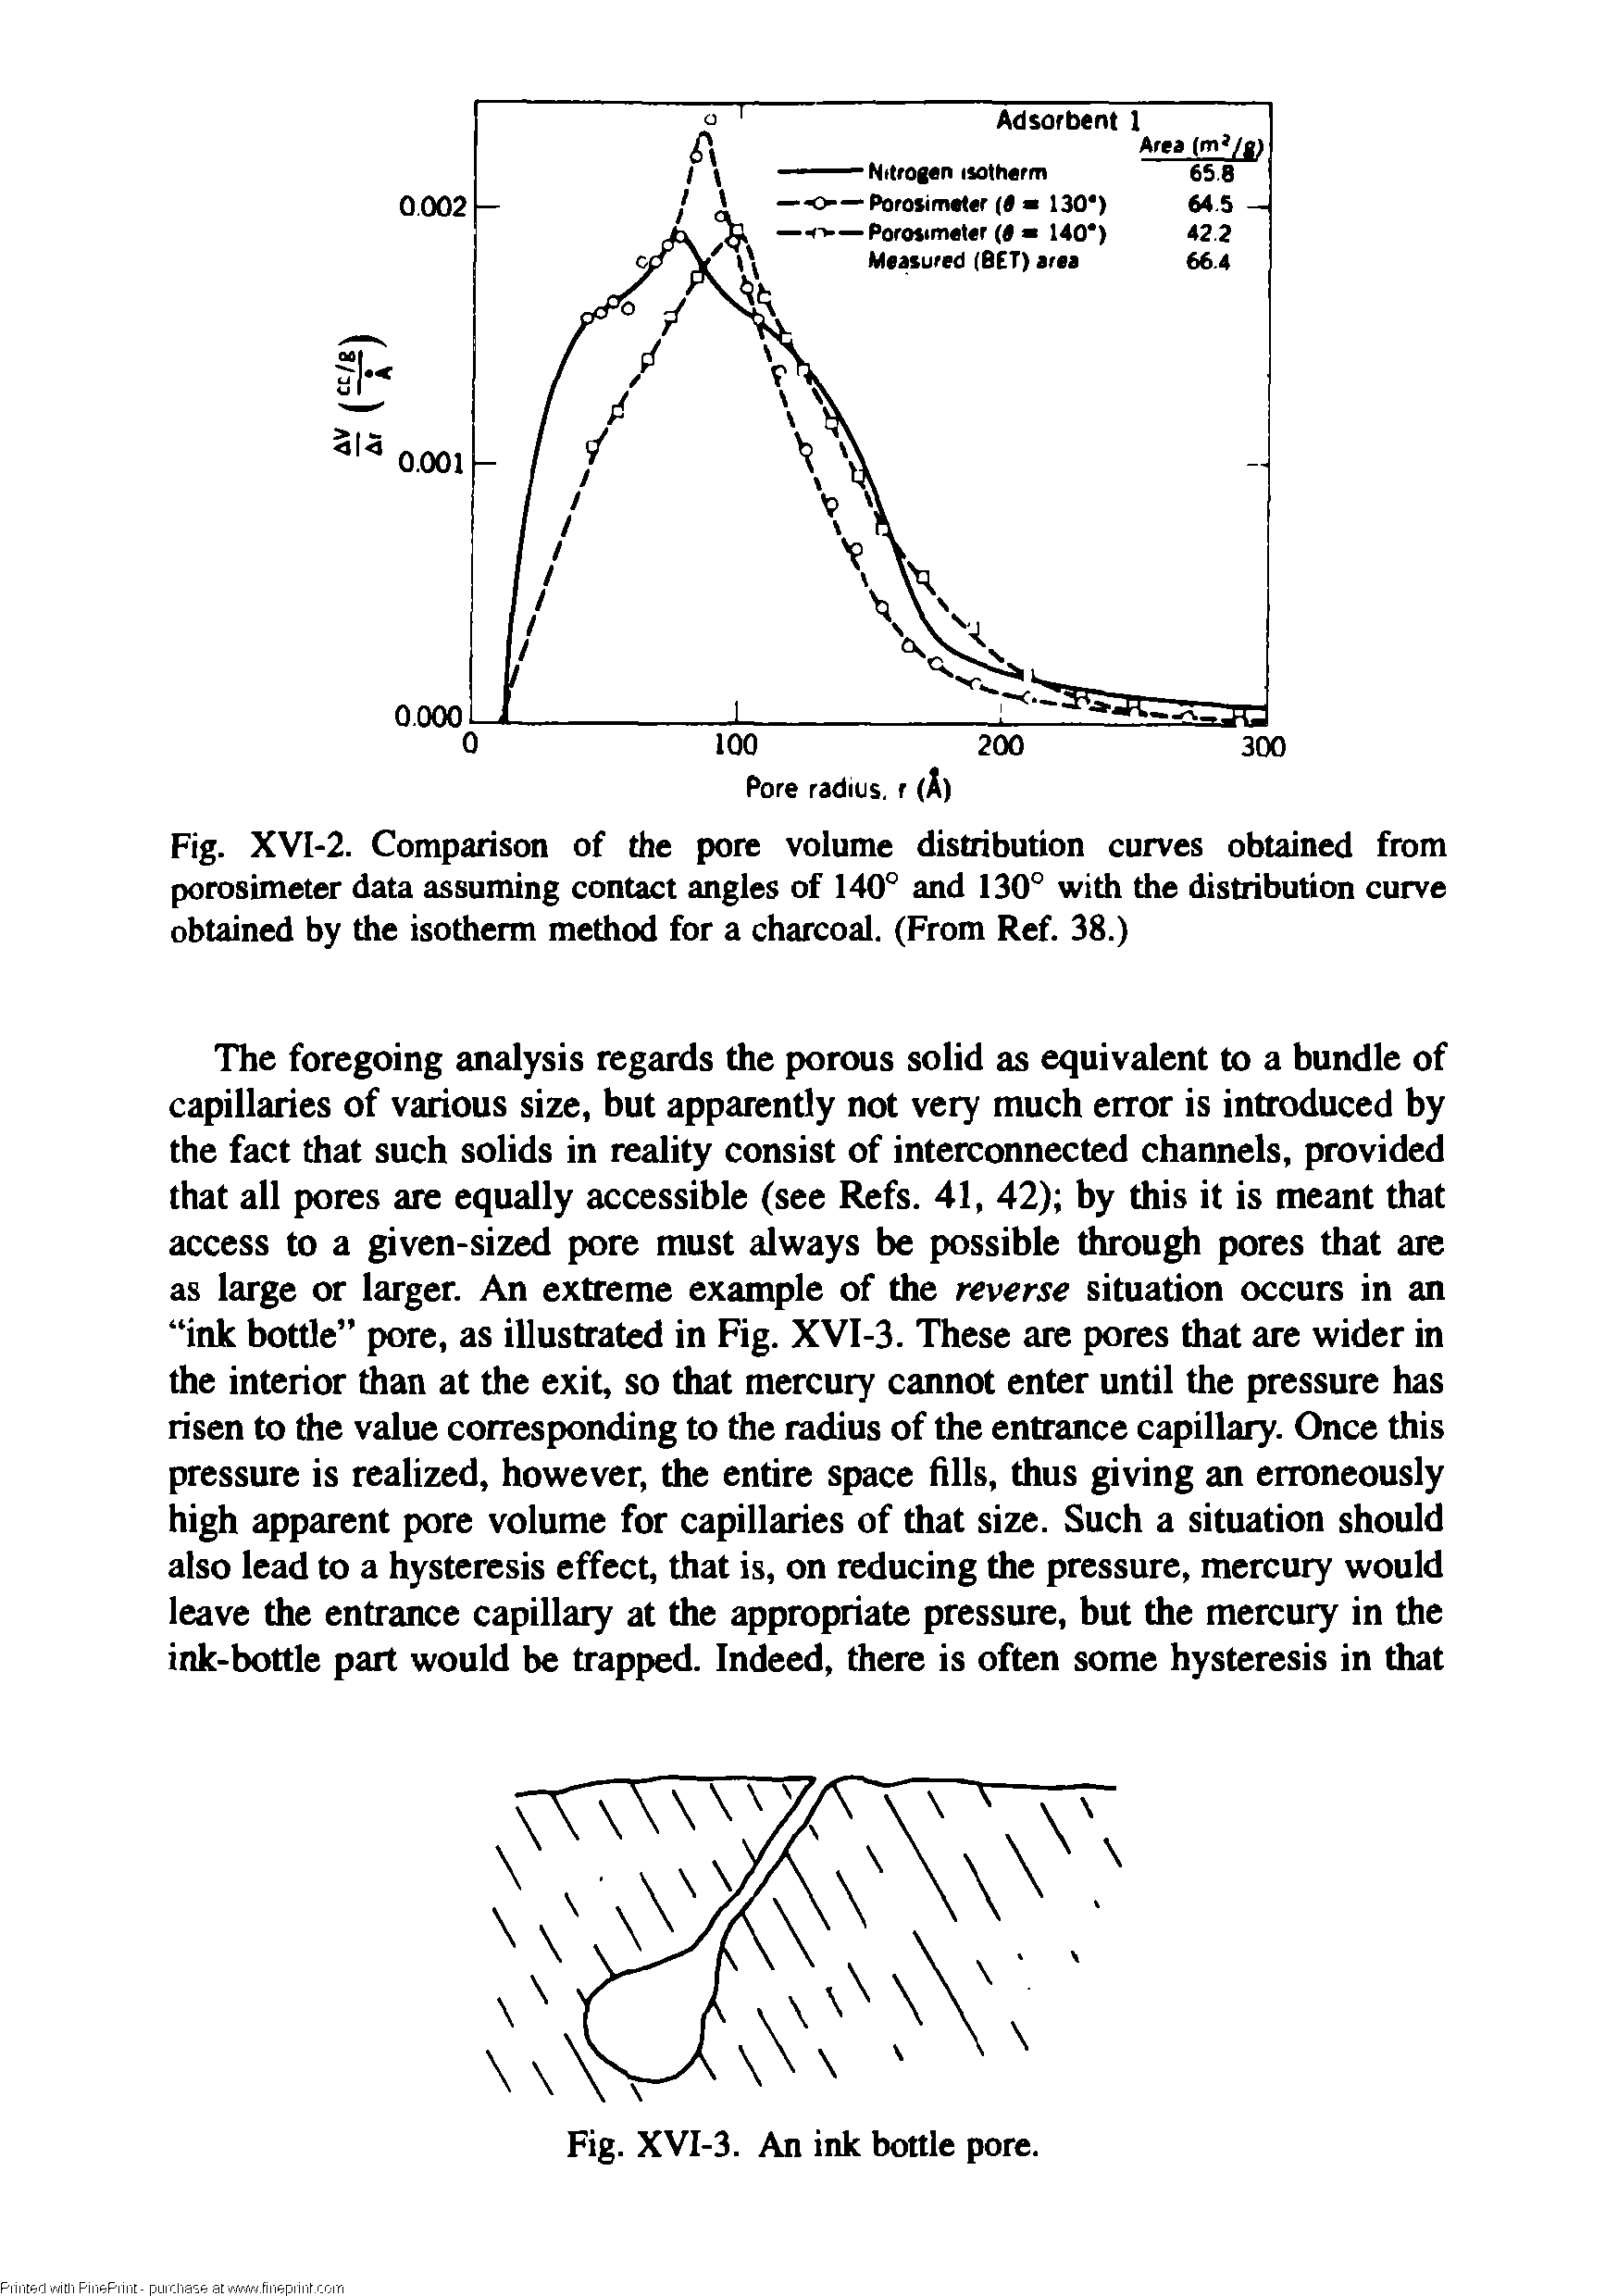 Fig. XVI-2. Comparison of the pore volume distribution curves obtained from porosimeter data assuming contact angles of 140° and 130° with the distribution curve obtained by the isotherm method for a charcoal. (From Ref. 38.)...